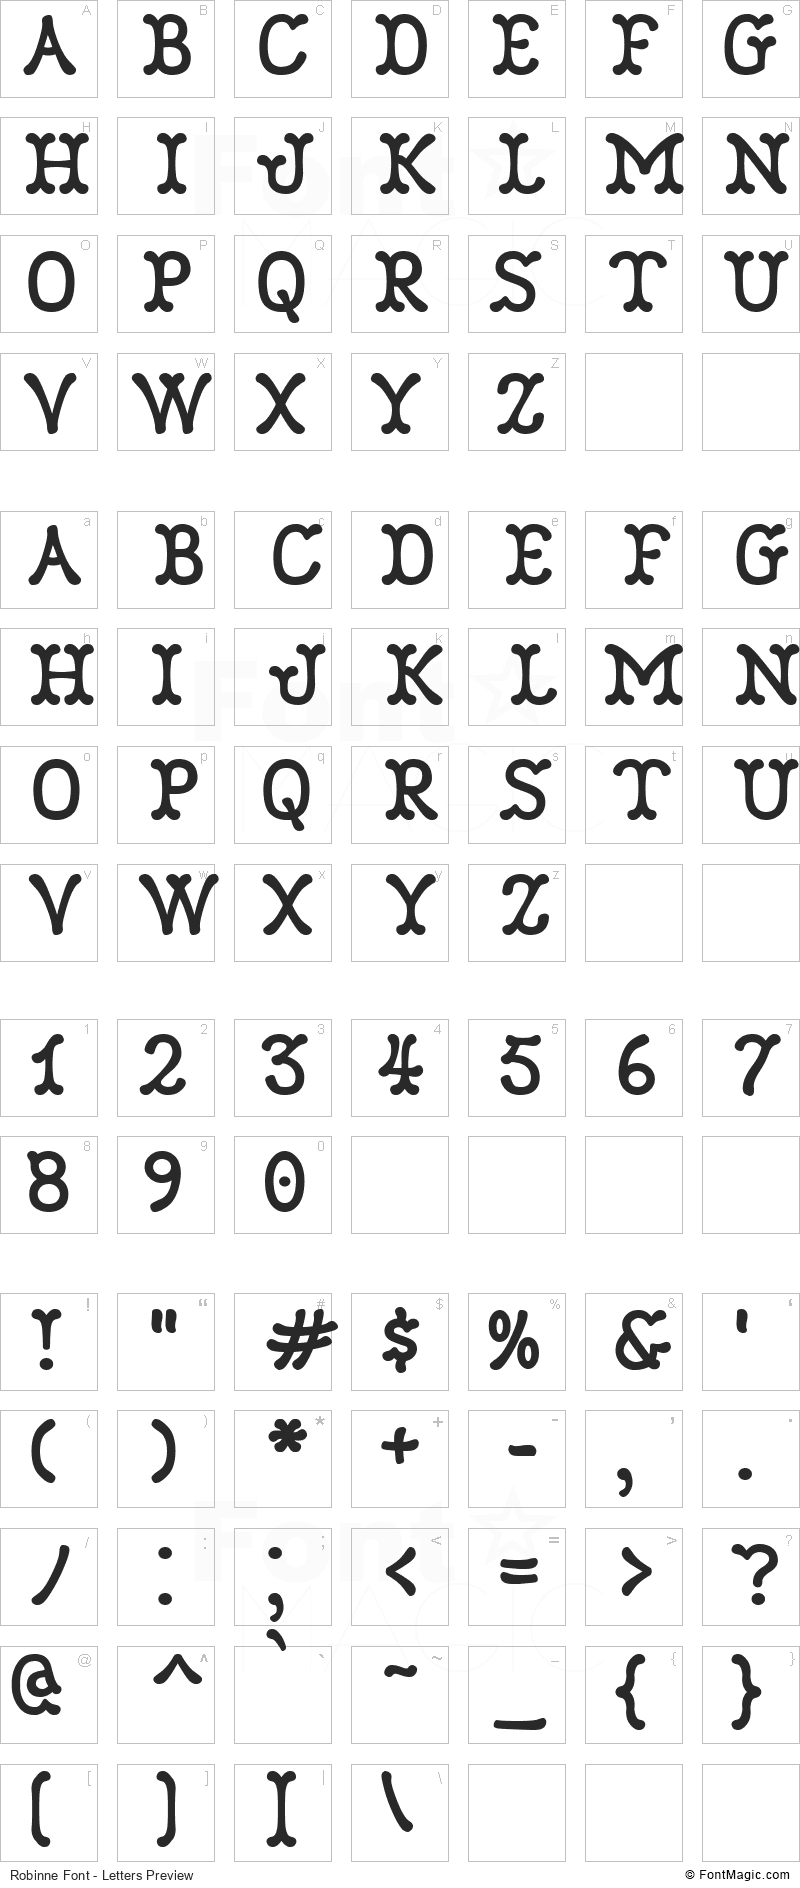 Robinne Font - All Latters Preview Chart